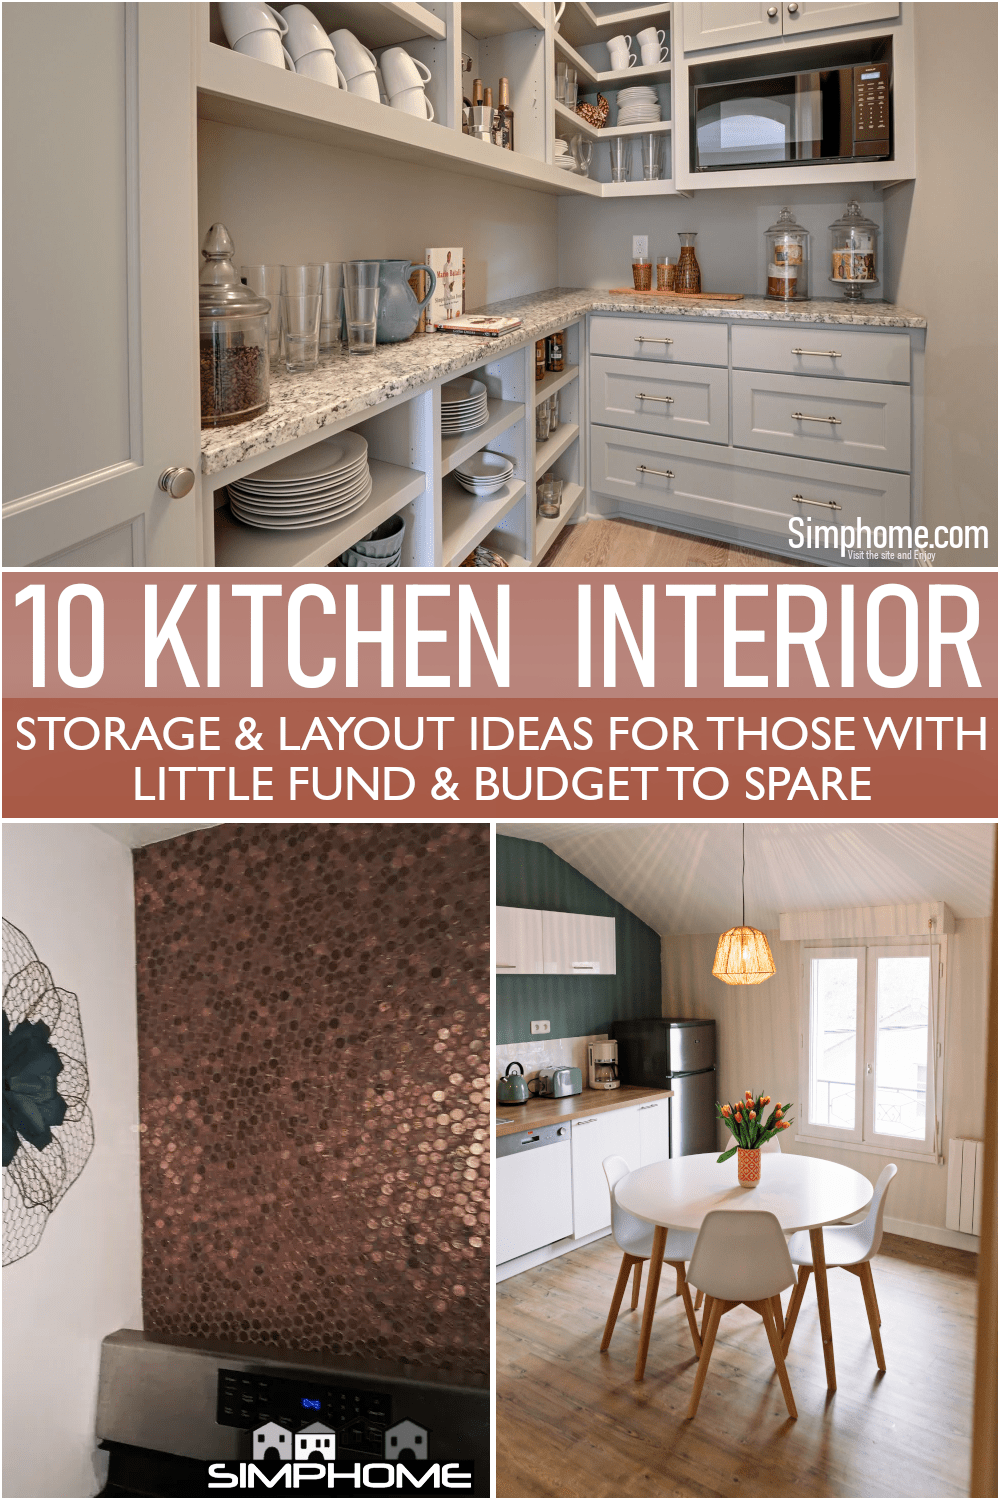 Enjoy and take inspiration from these 10 Kitchen Interior and Layout Ideas for Cheaps